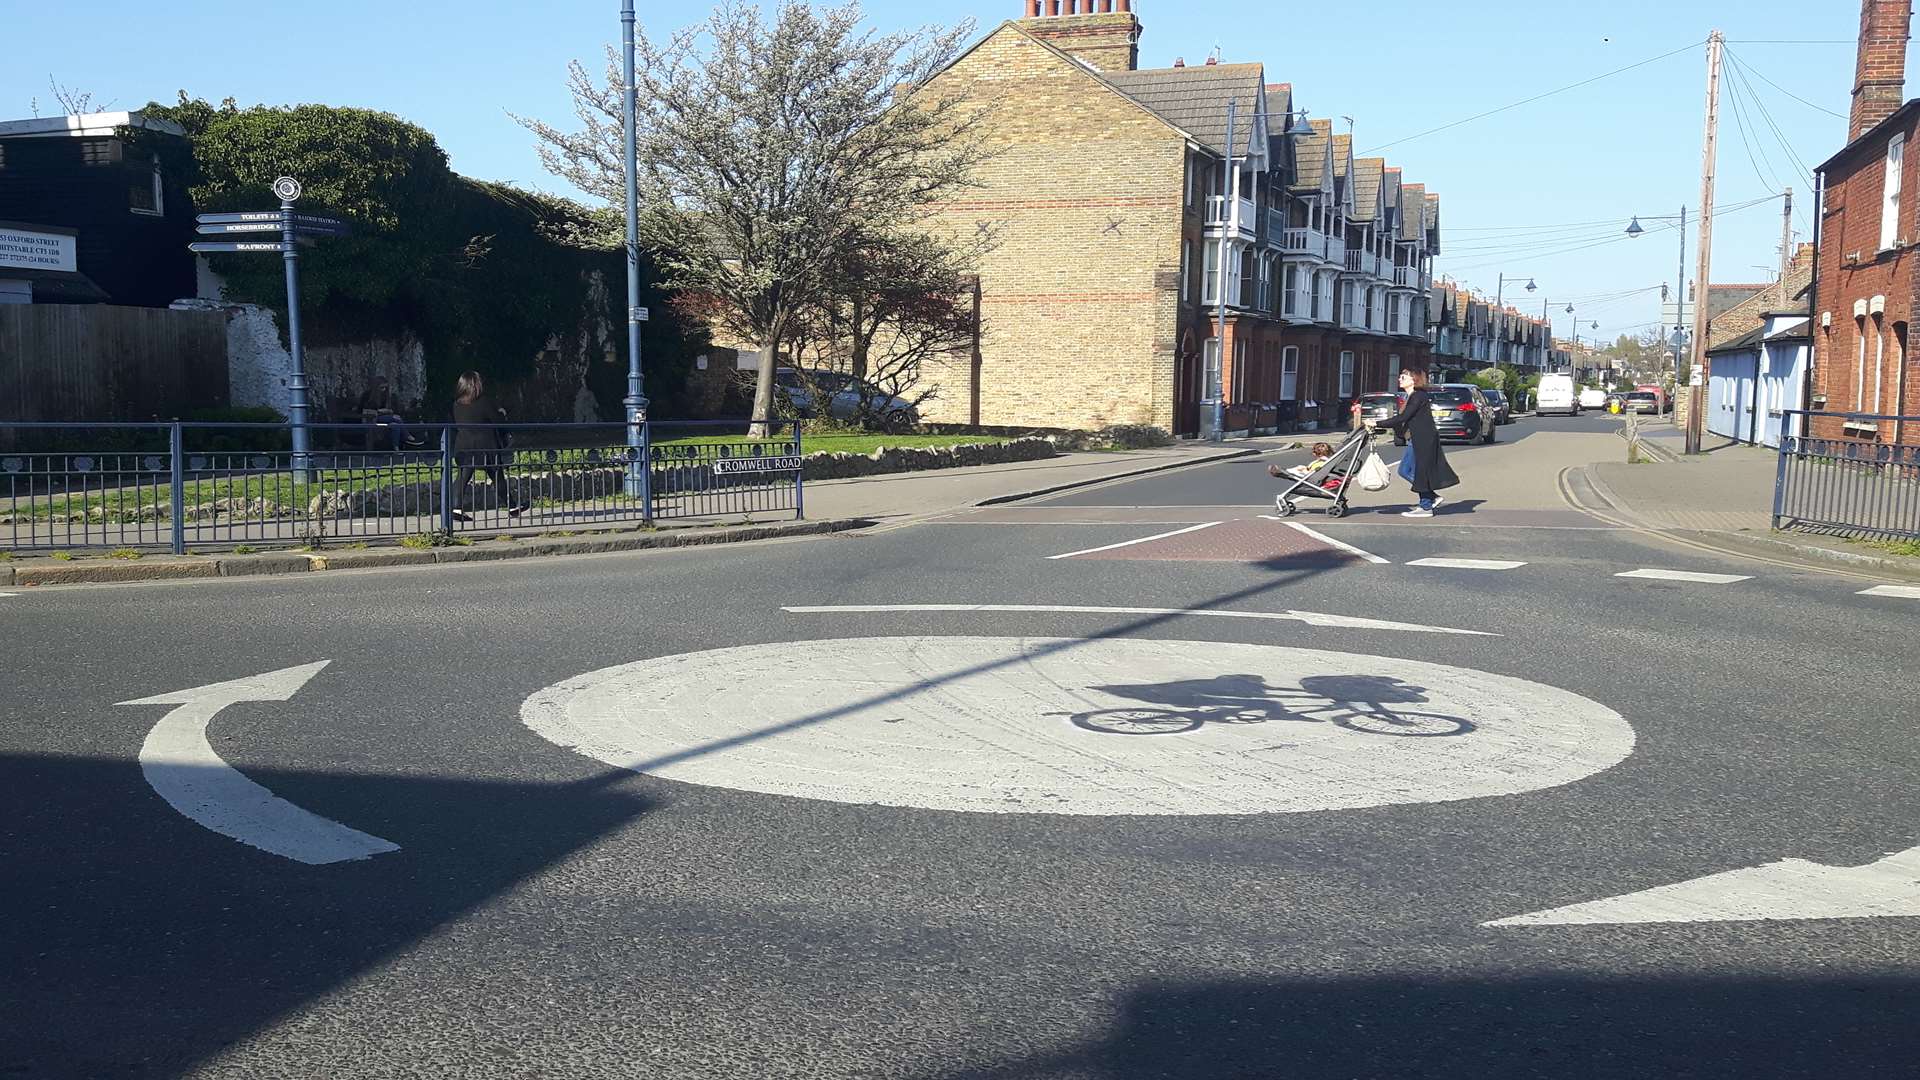 The artwork is on a mini roundabout in Whitstable.